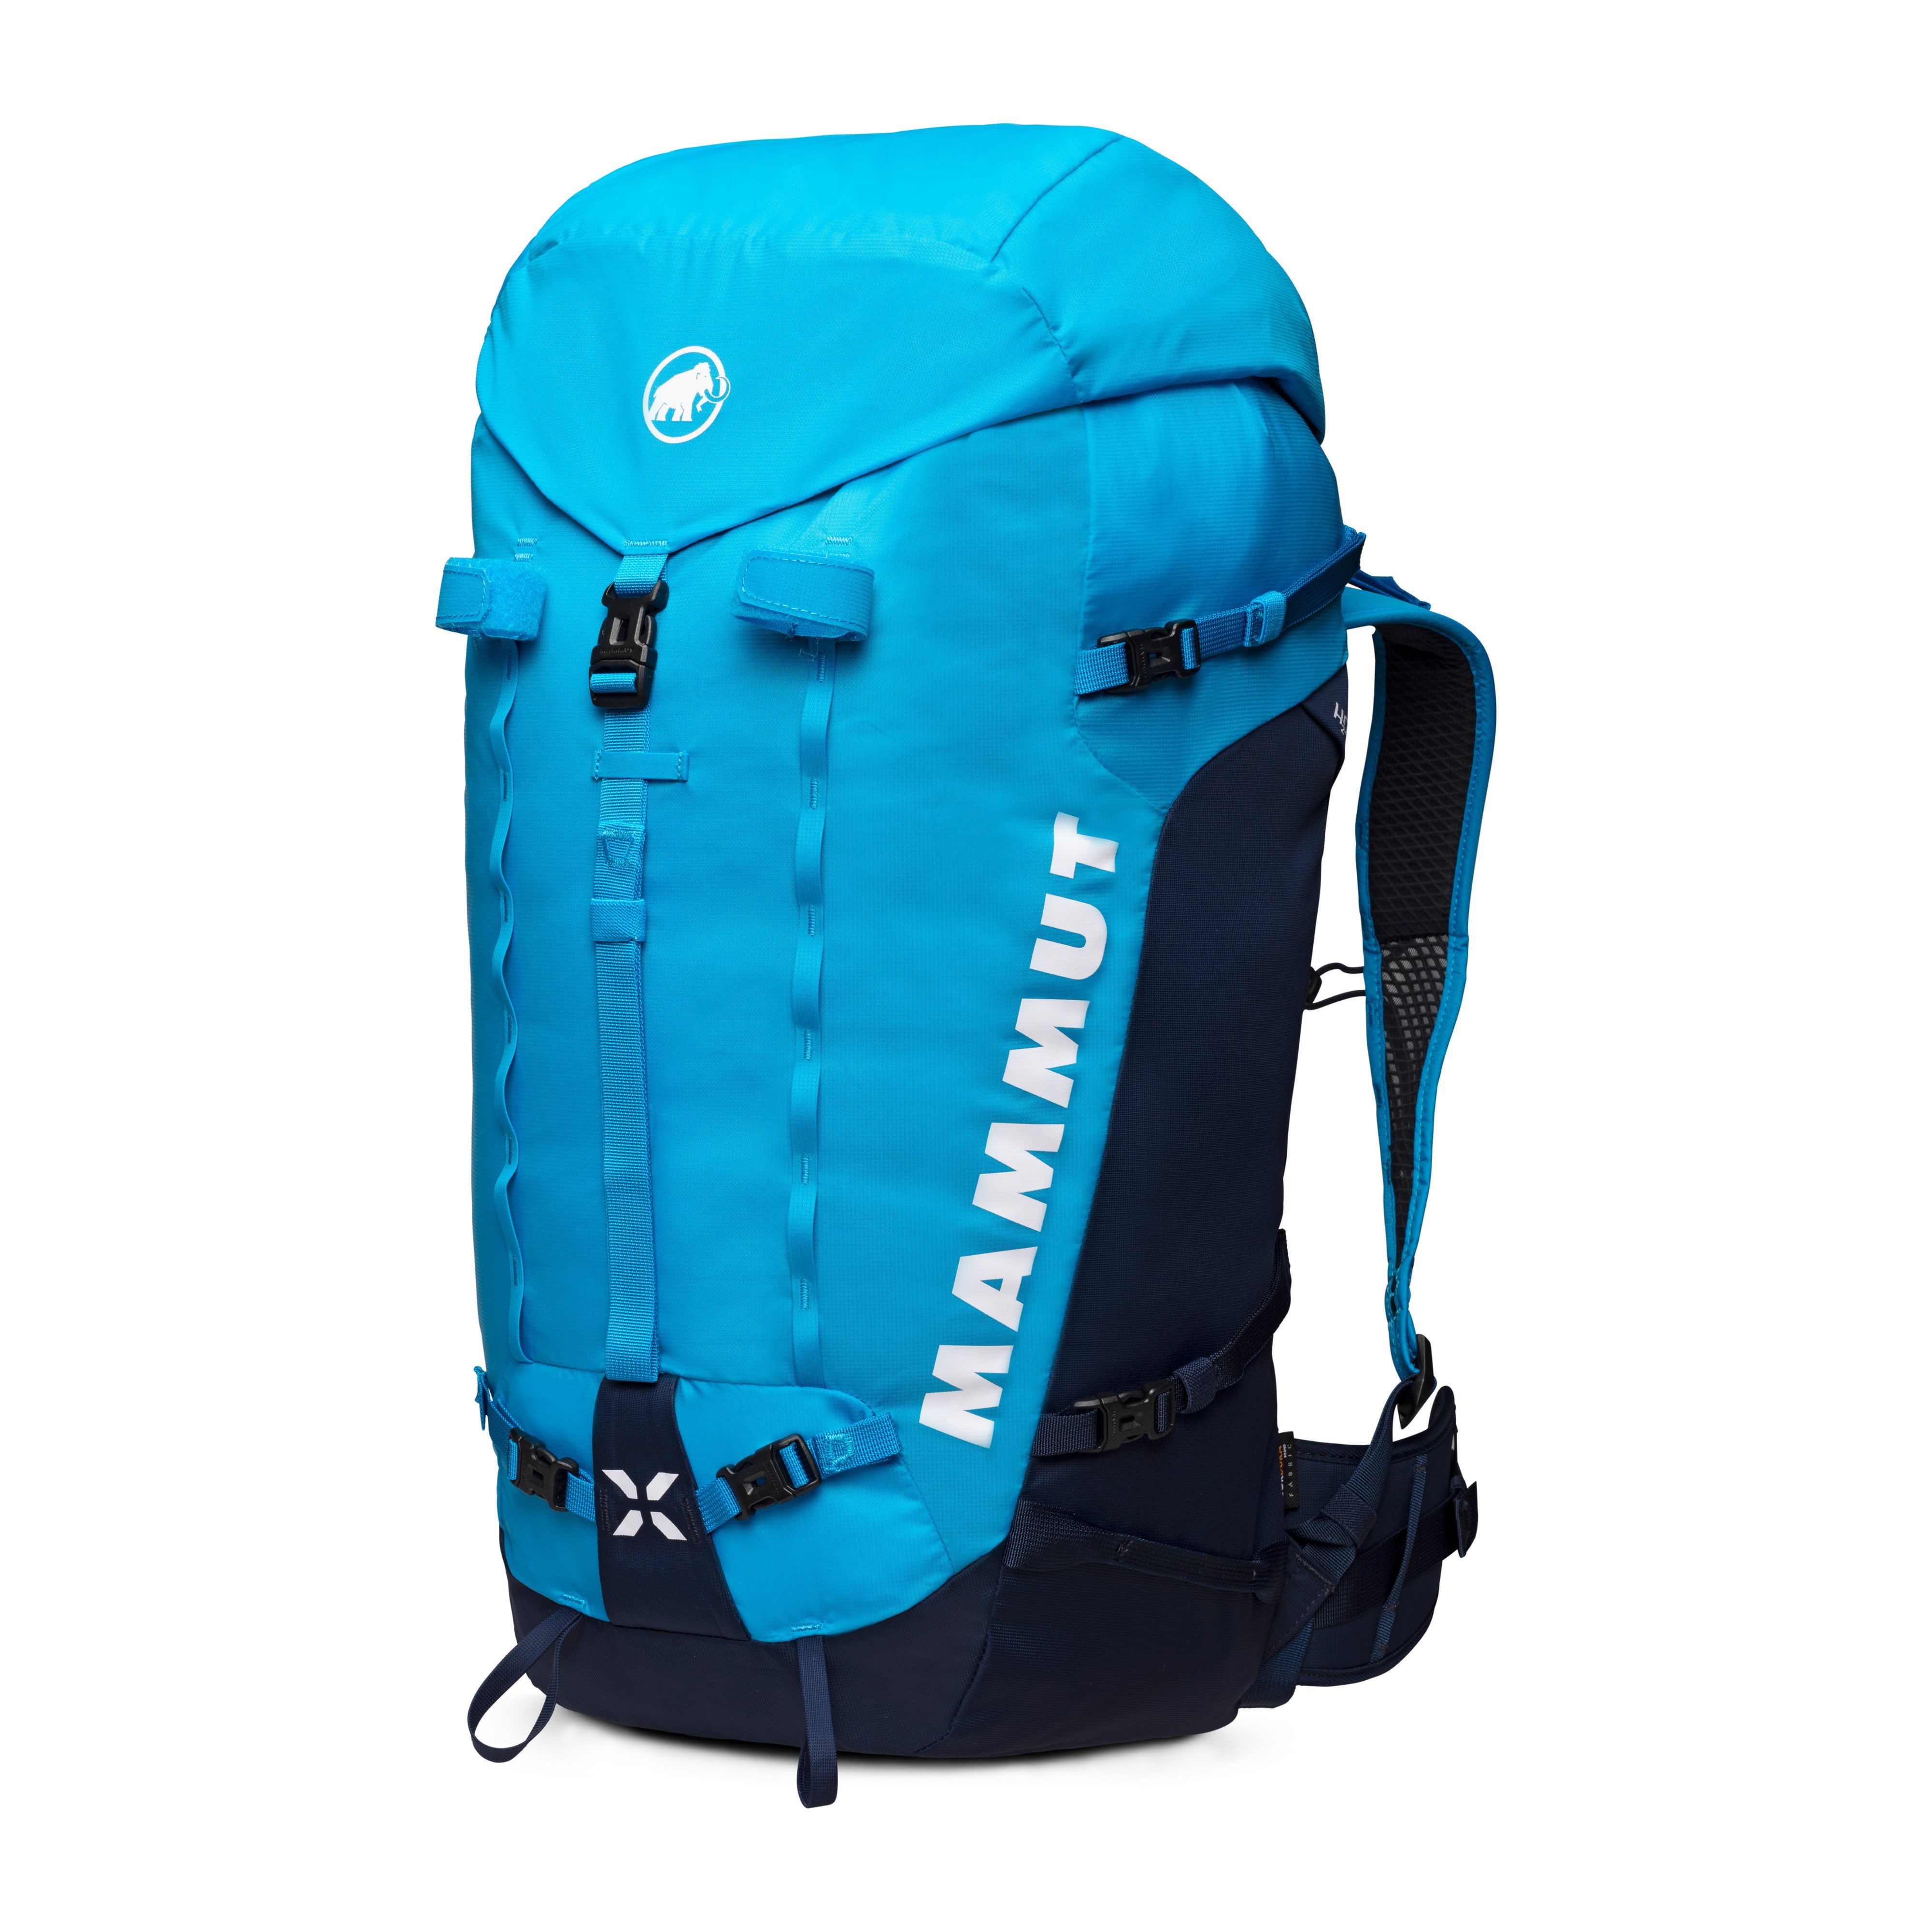 Trion Nordwand 38 Women - sky-night, 38 L product image